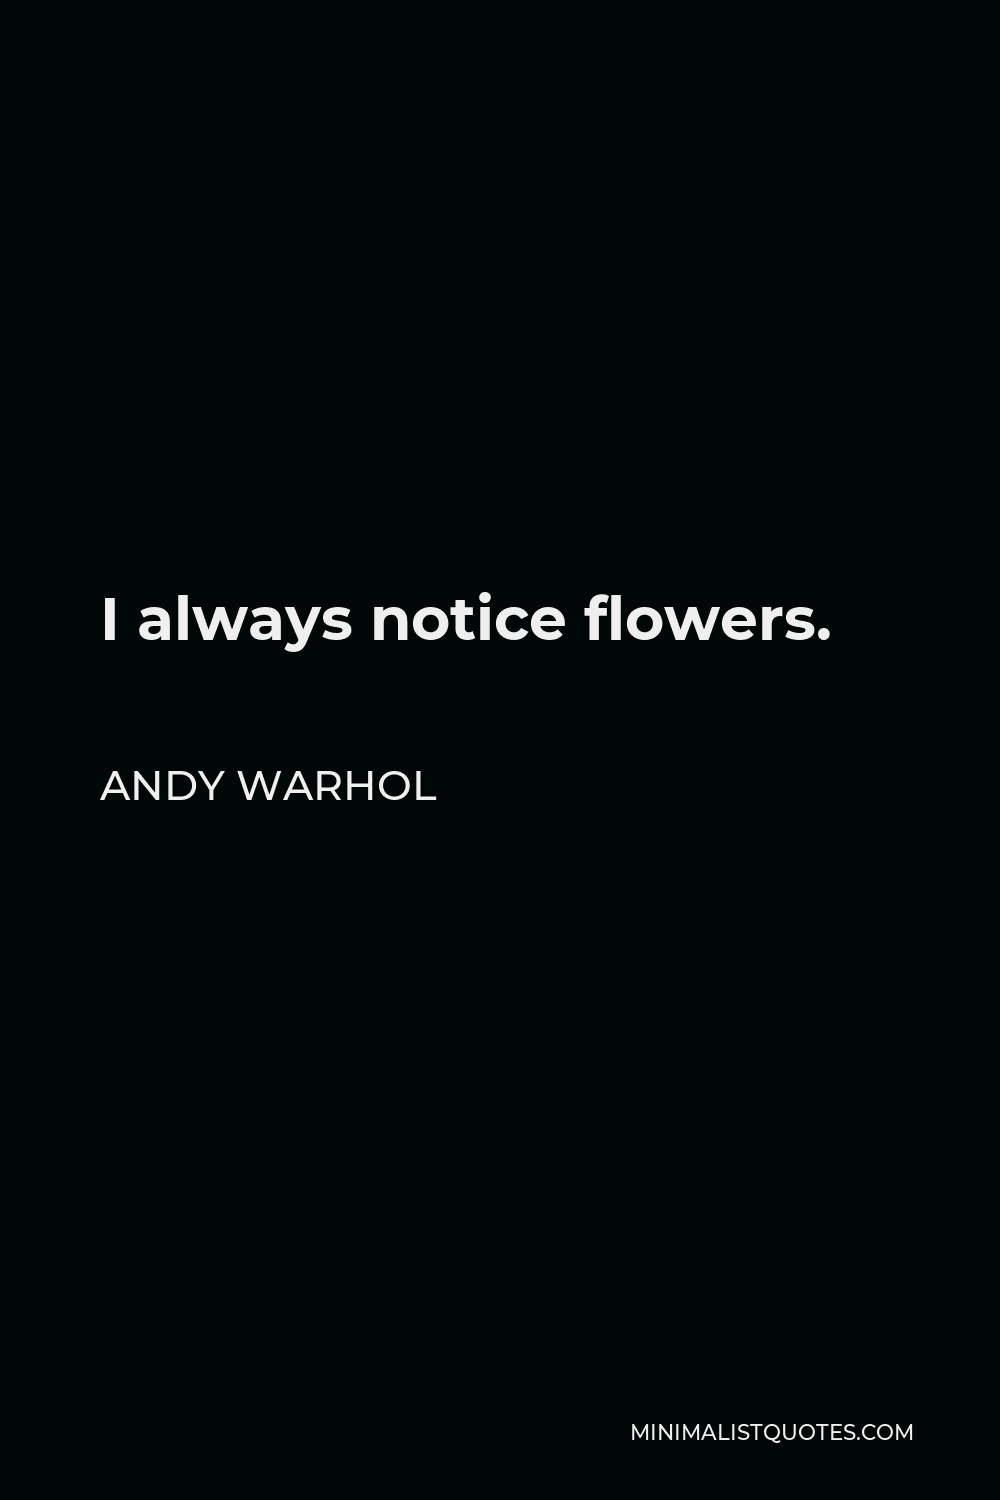 Andy Warhol Quote - I always notice flowers.